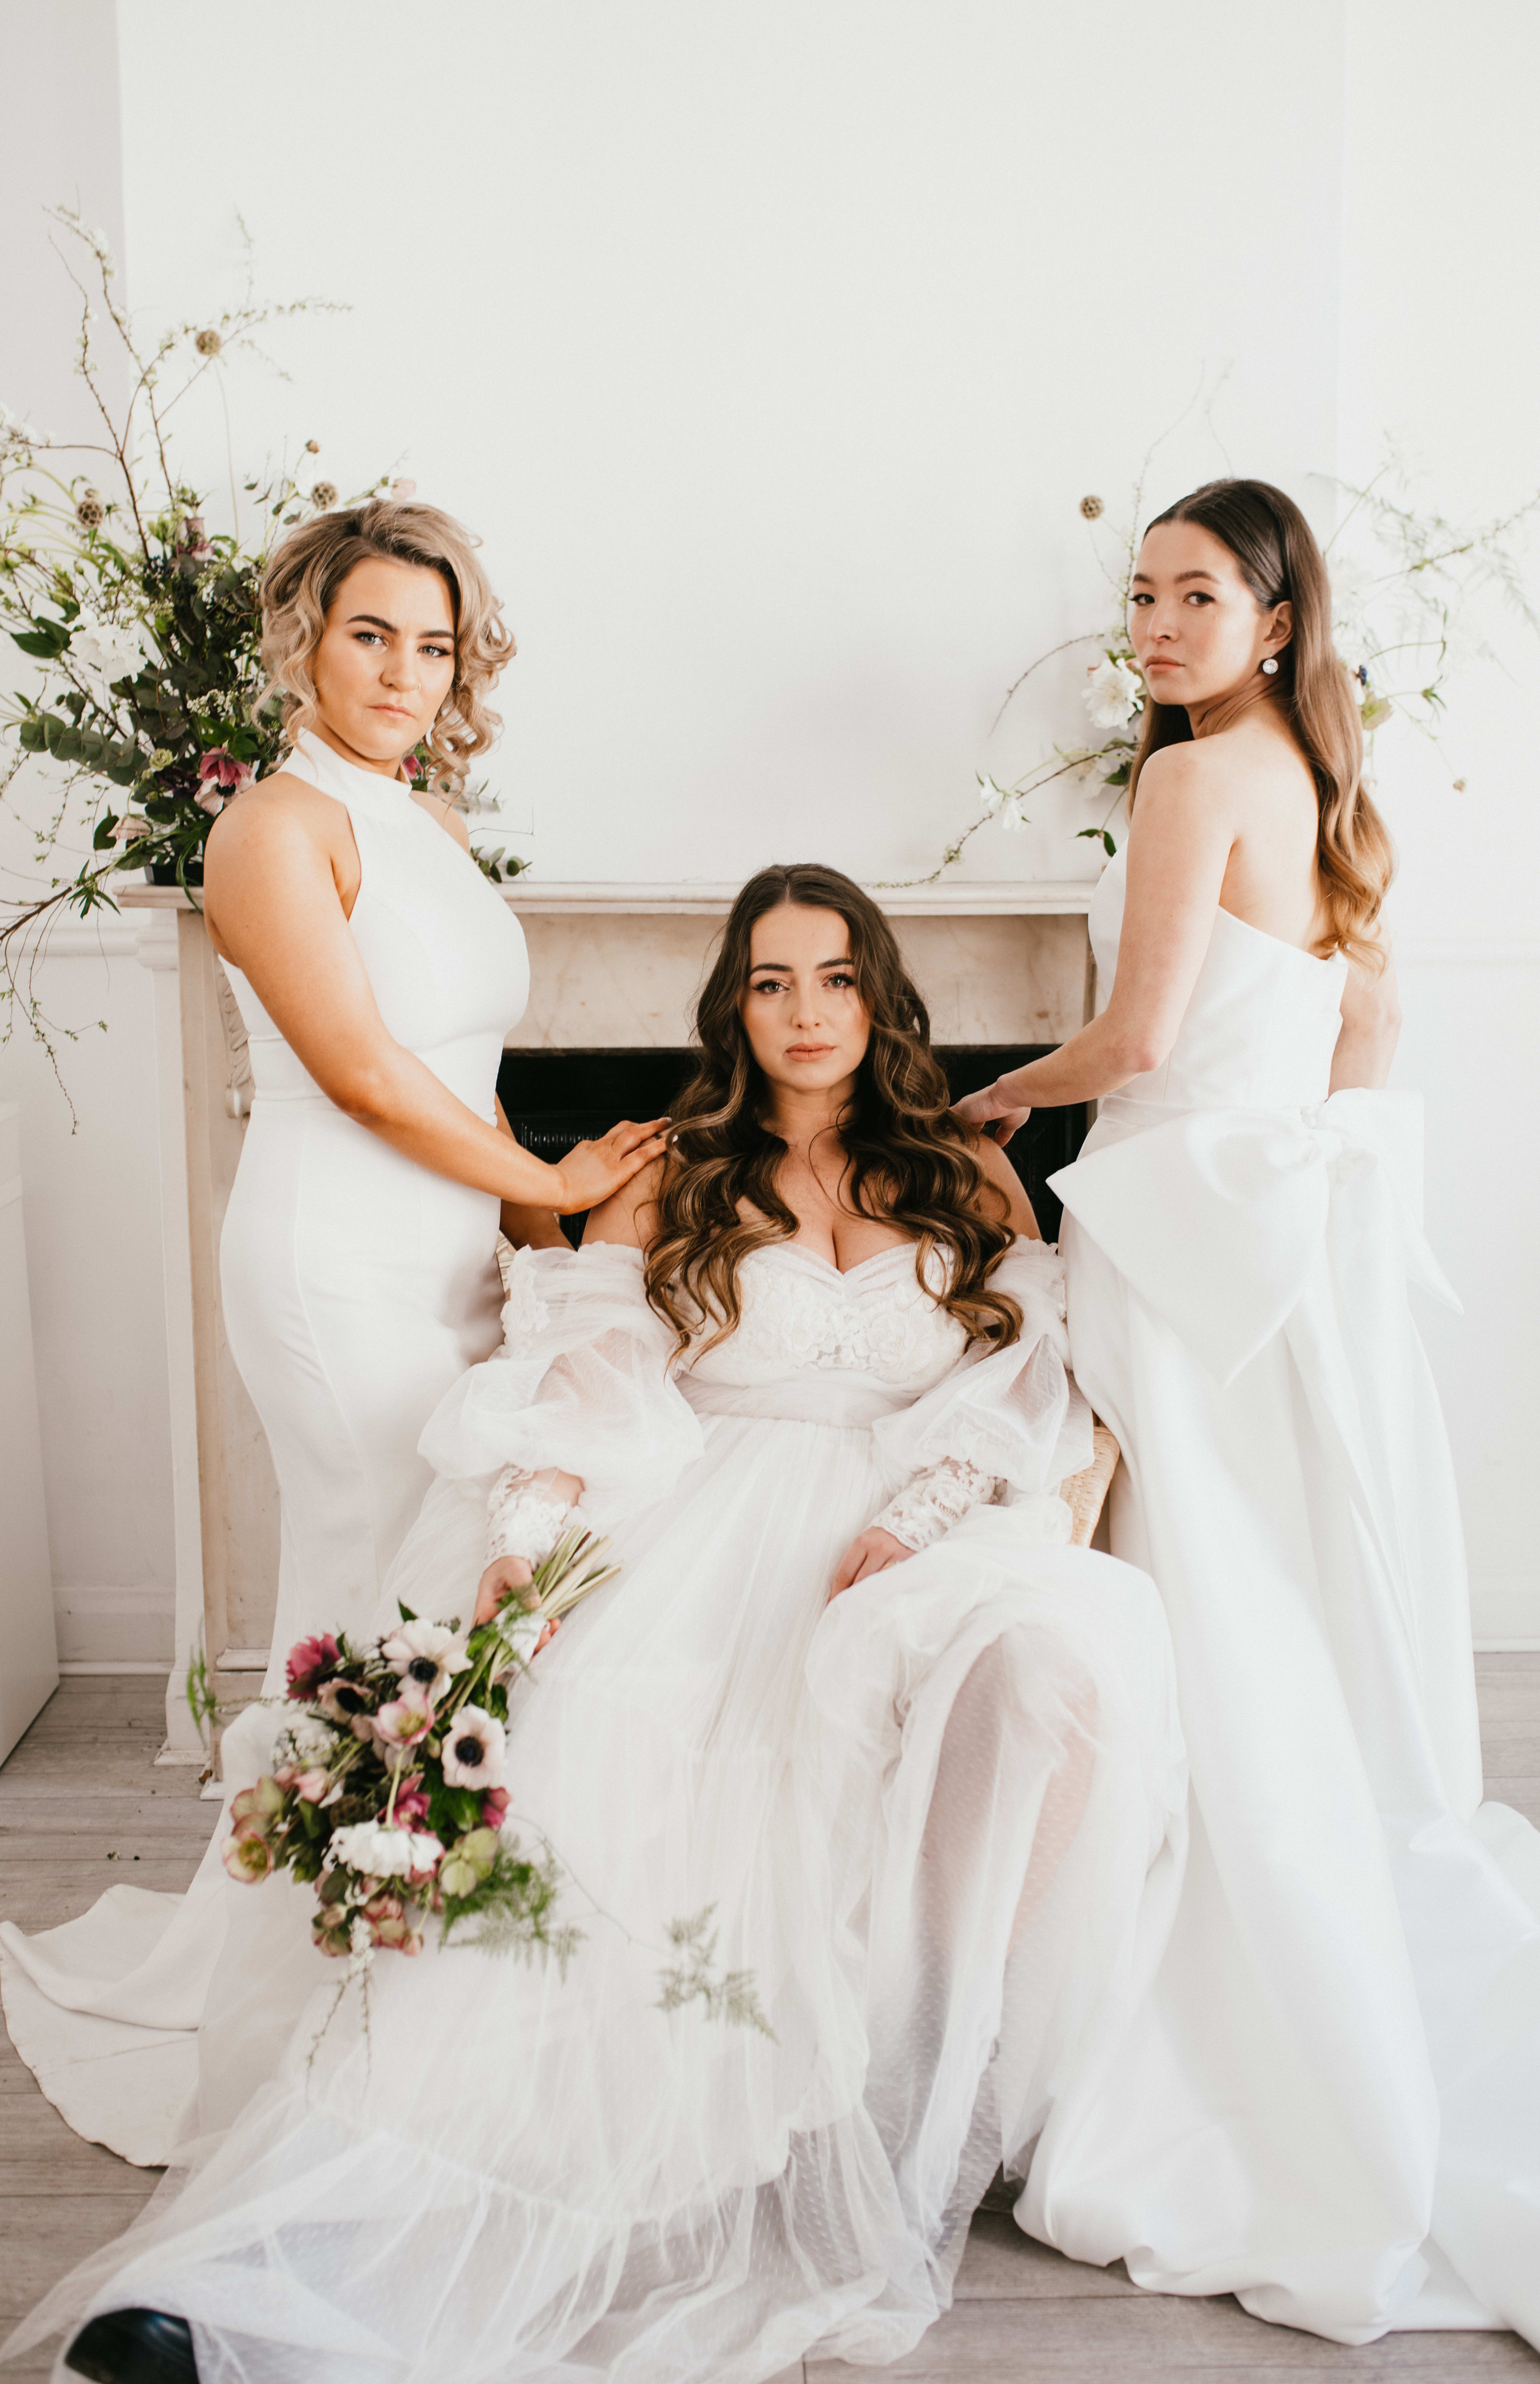 A bridal photoshoot with the bridesmaids set against a white fireplace surrounded by flowers.